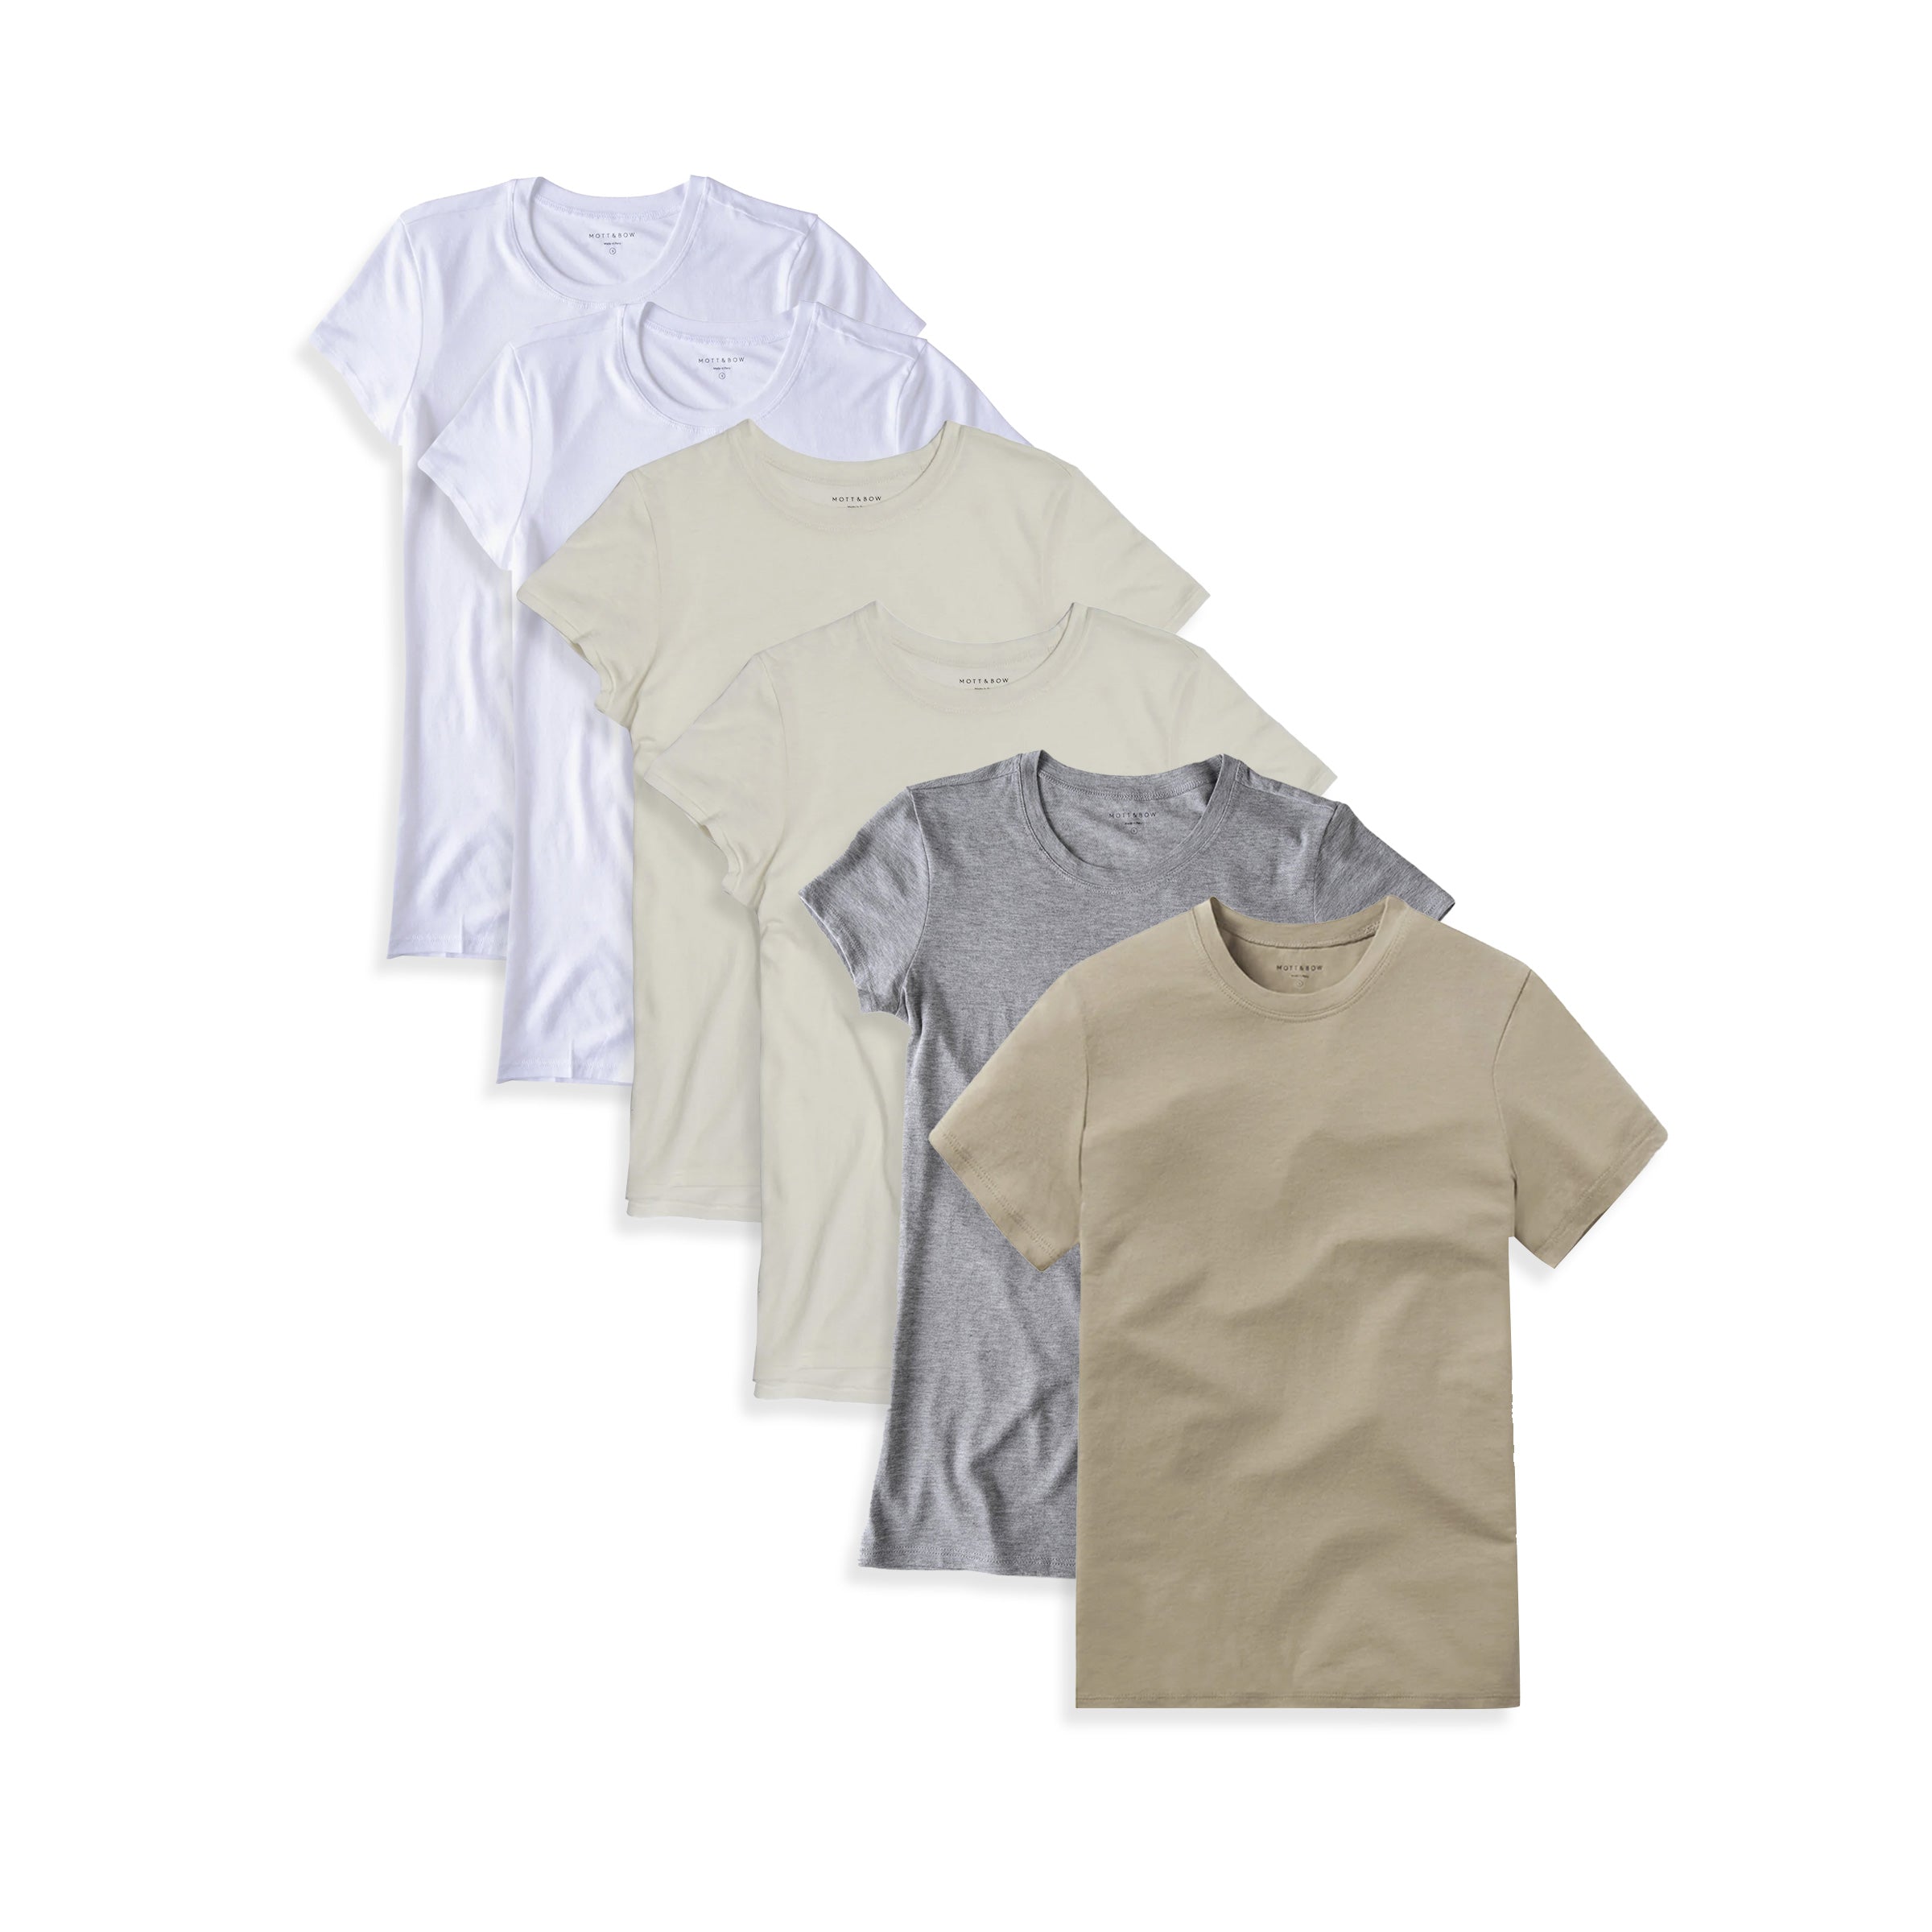 Women wearing Blanc/Blanc Vintage/Gris Chiné/Olive Fitted Crew Marcy 6-Pack tees